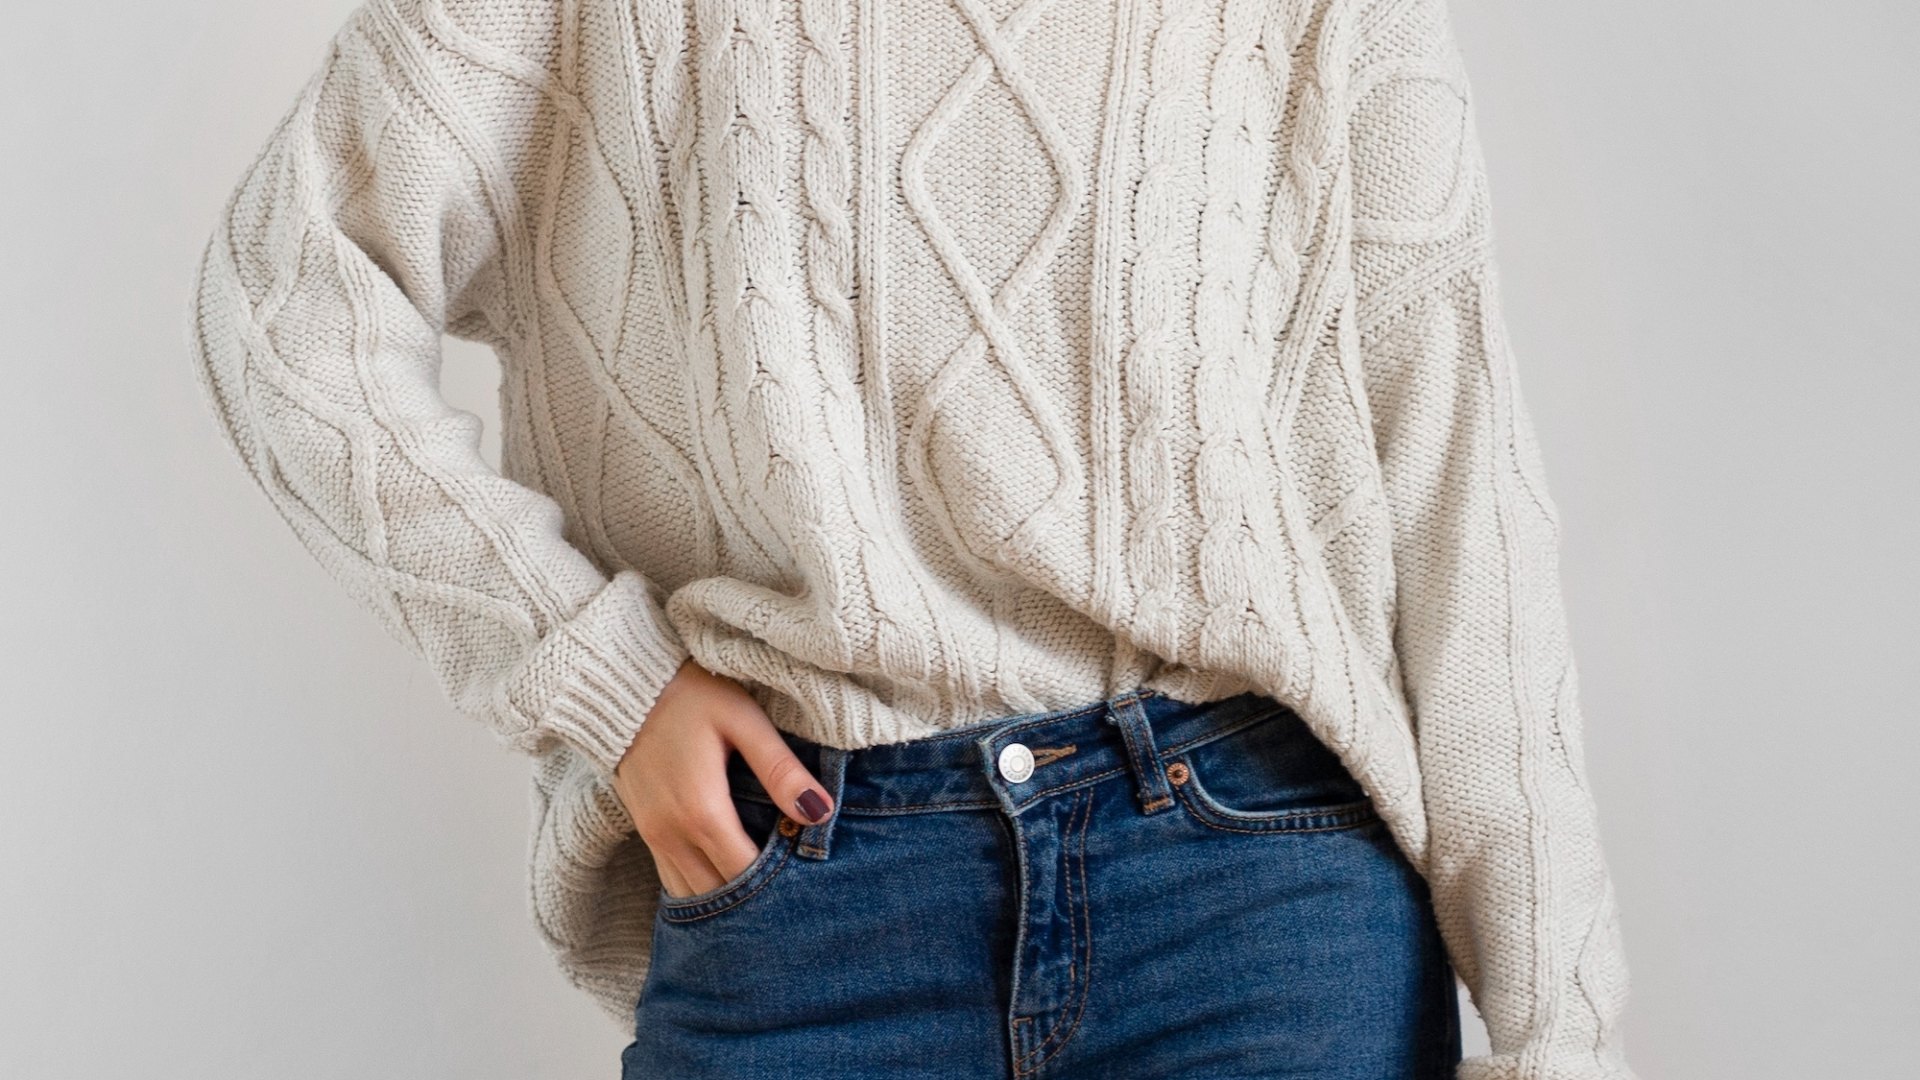 QUALFORT Cardigan Sweater Is the Best Fall Knit | Us Weekly